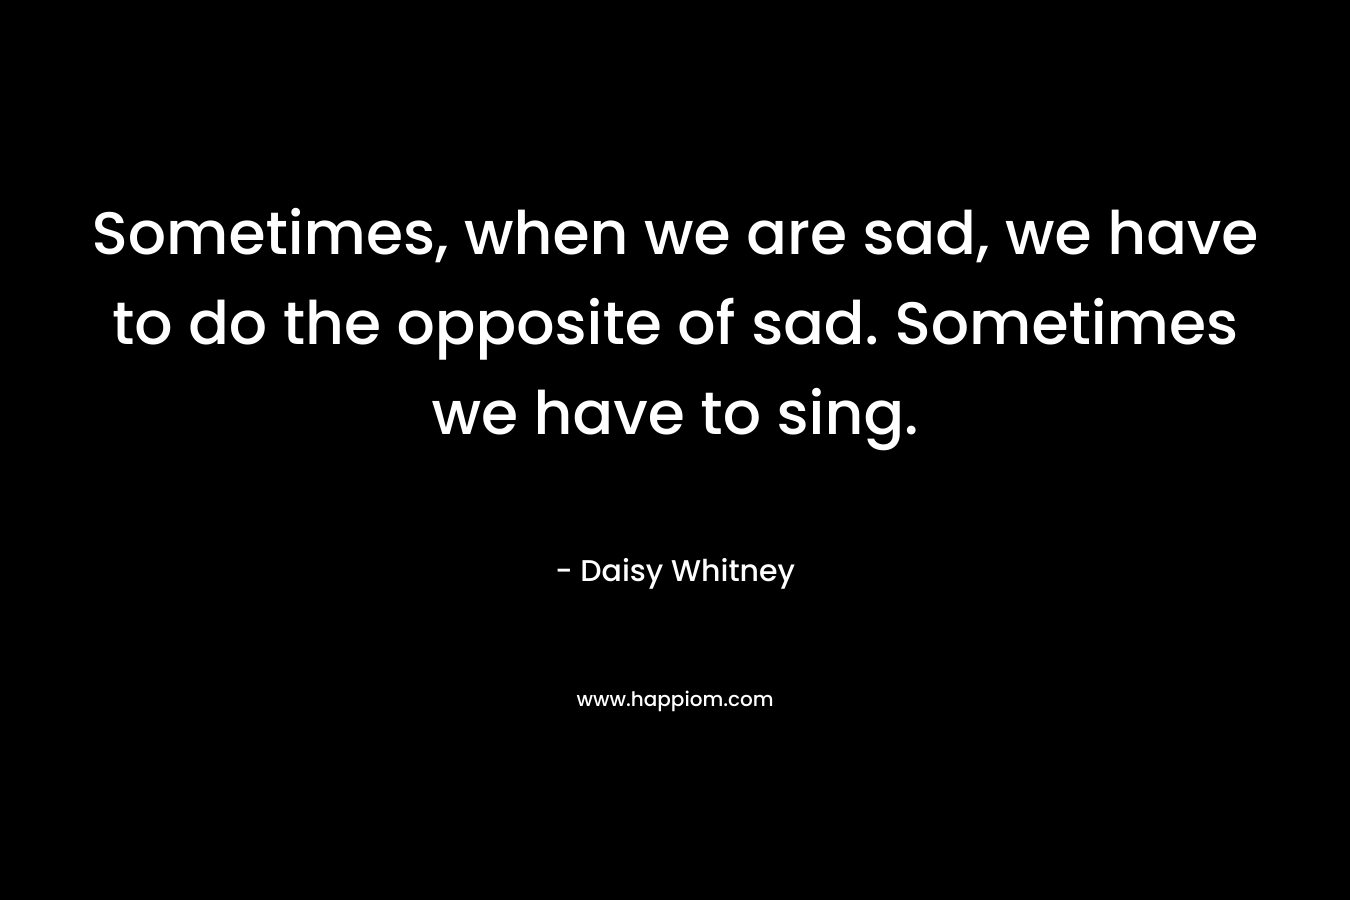 Sometimes, when we are sad, we have to do the opposite of sad. Sometimes we have to sing.